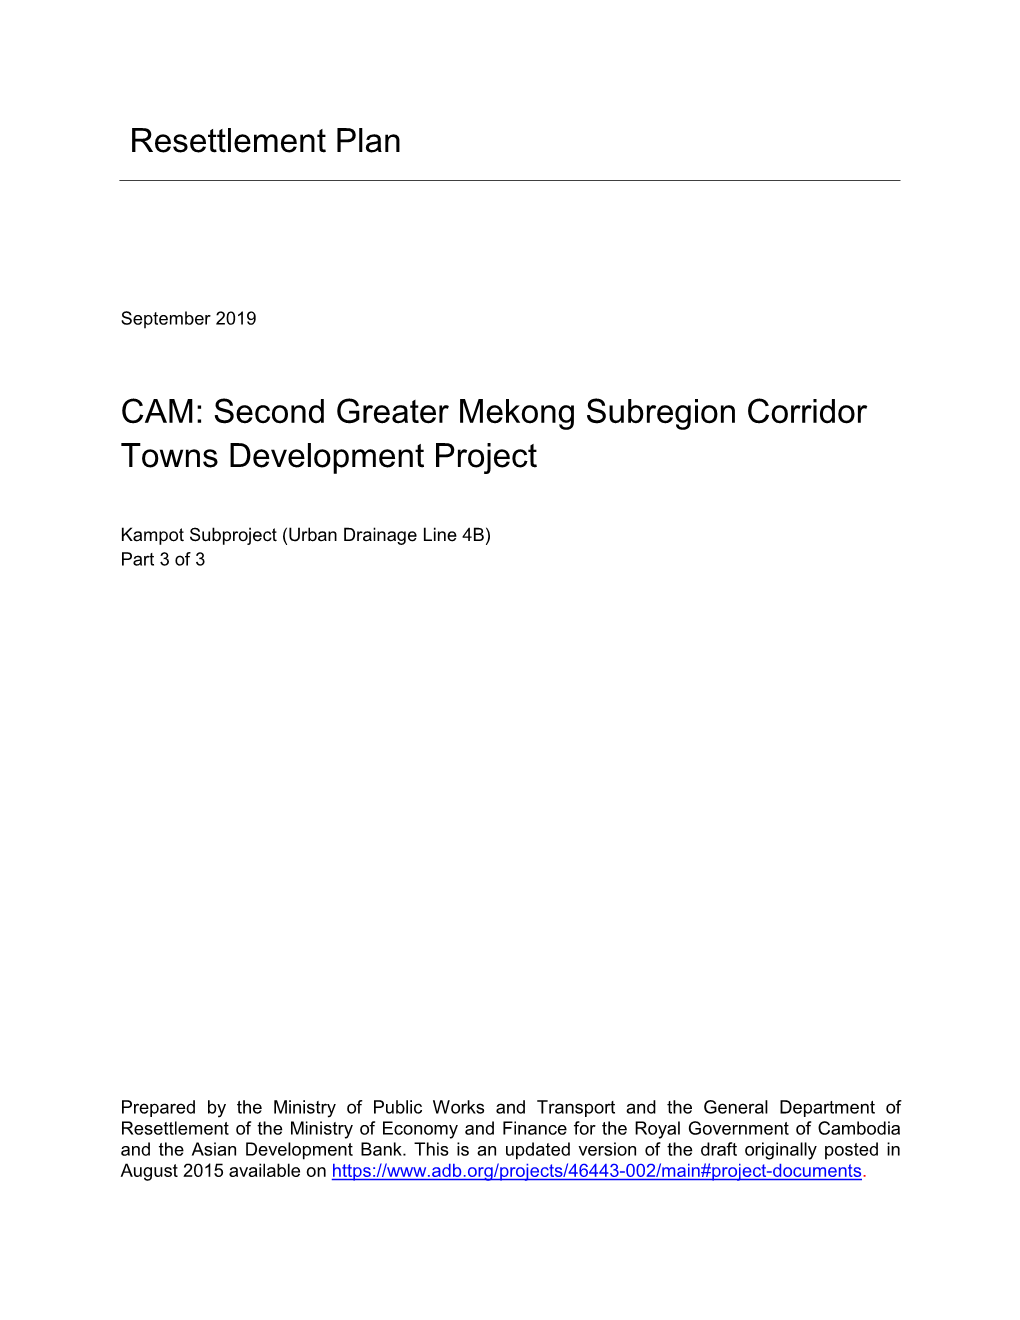 Second Greater Mekong Subregion Corridor Towns Development Project